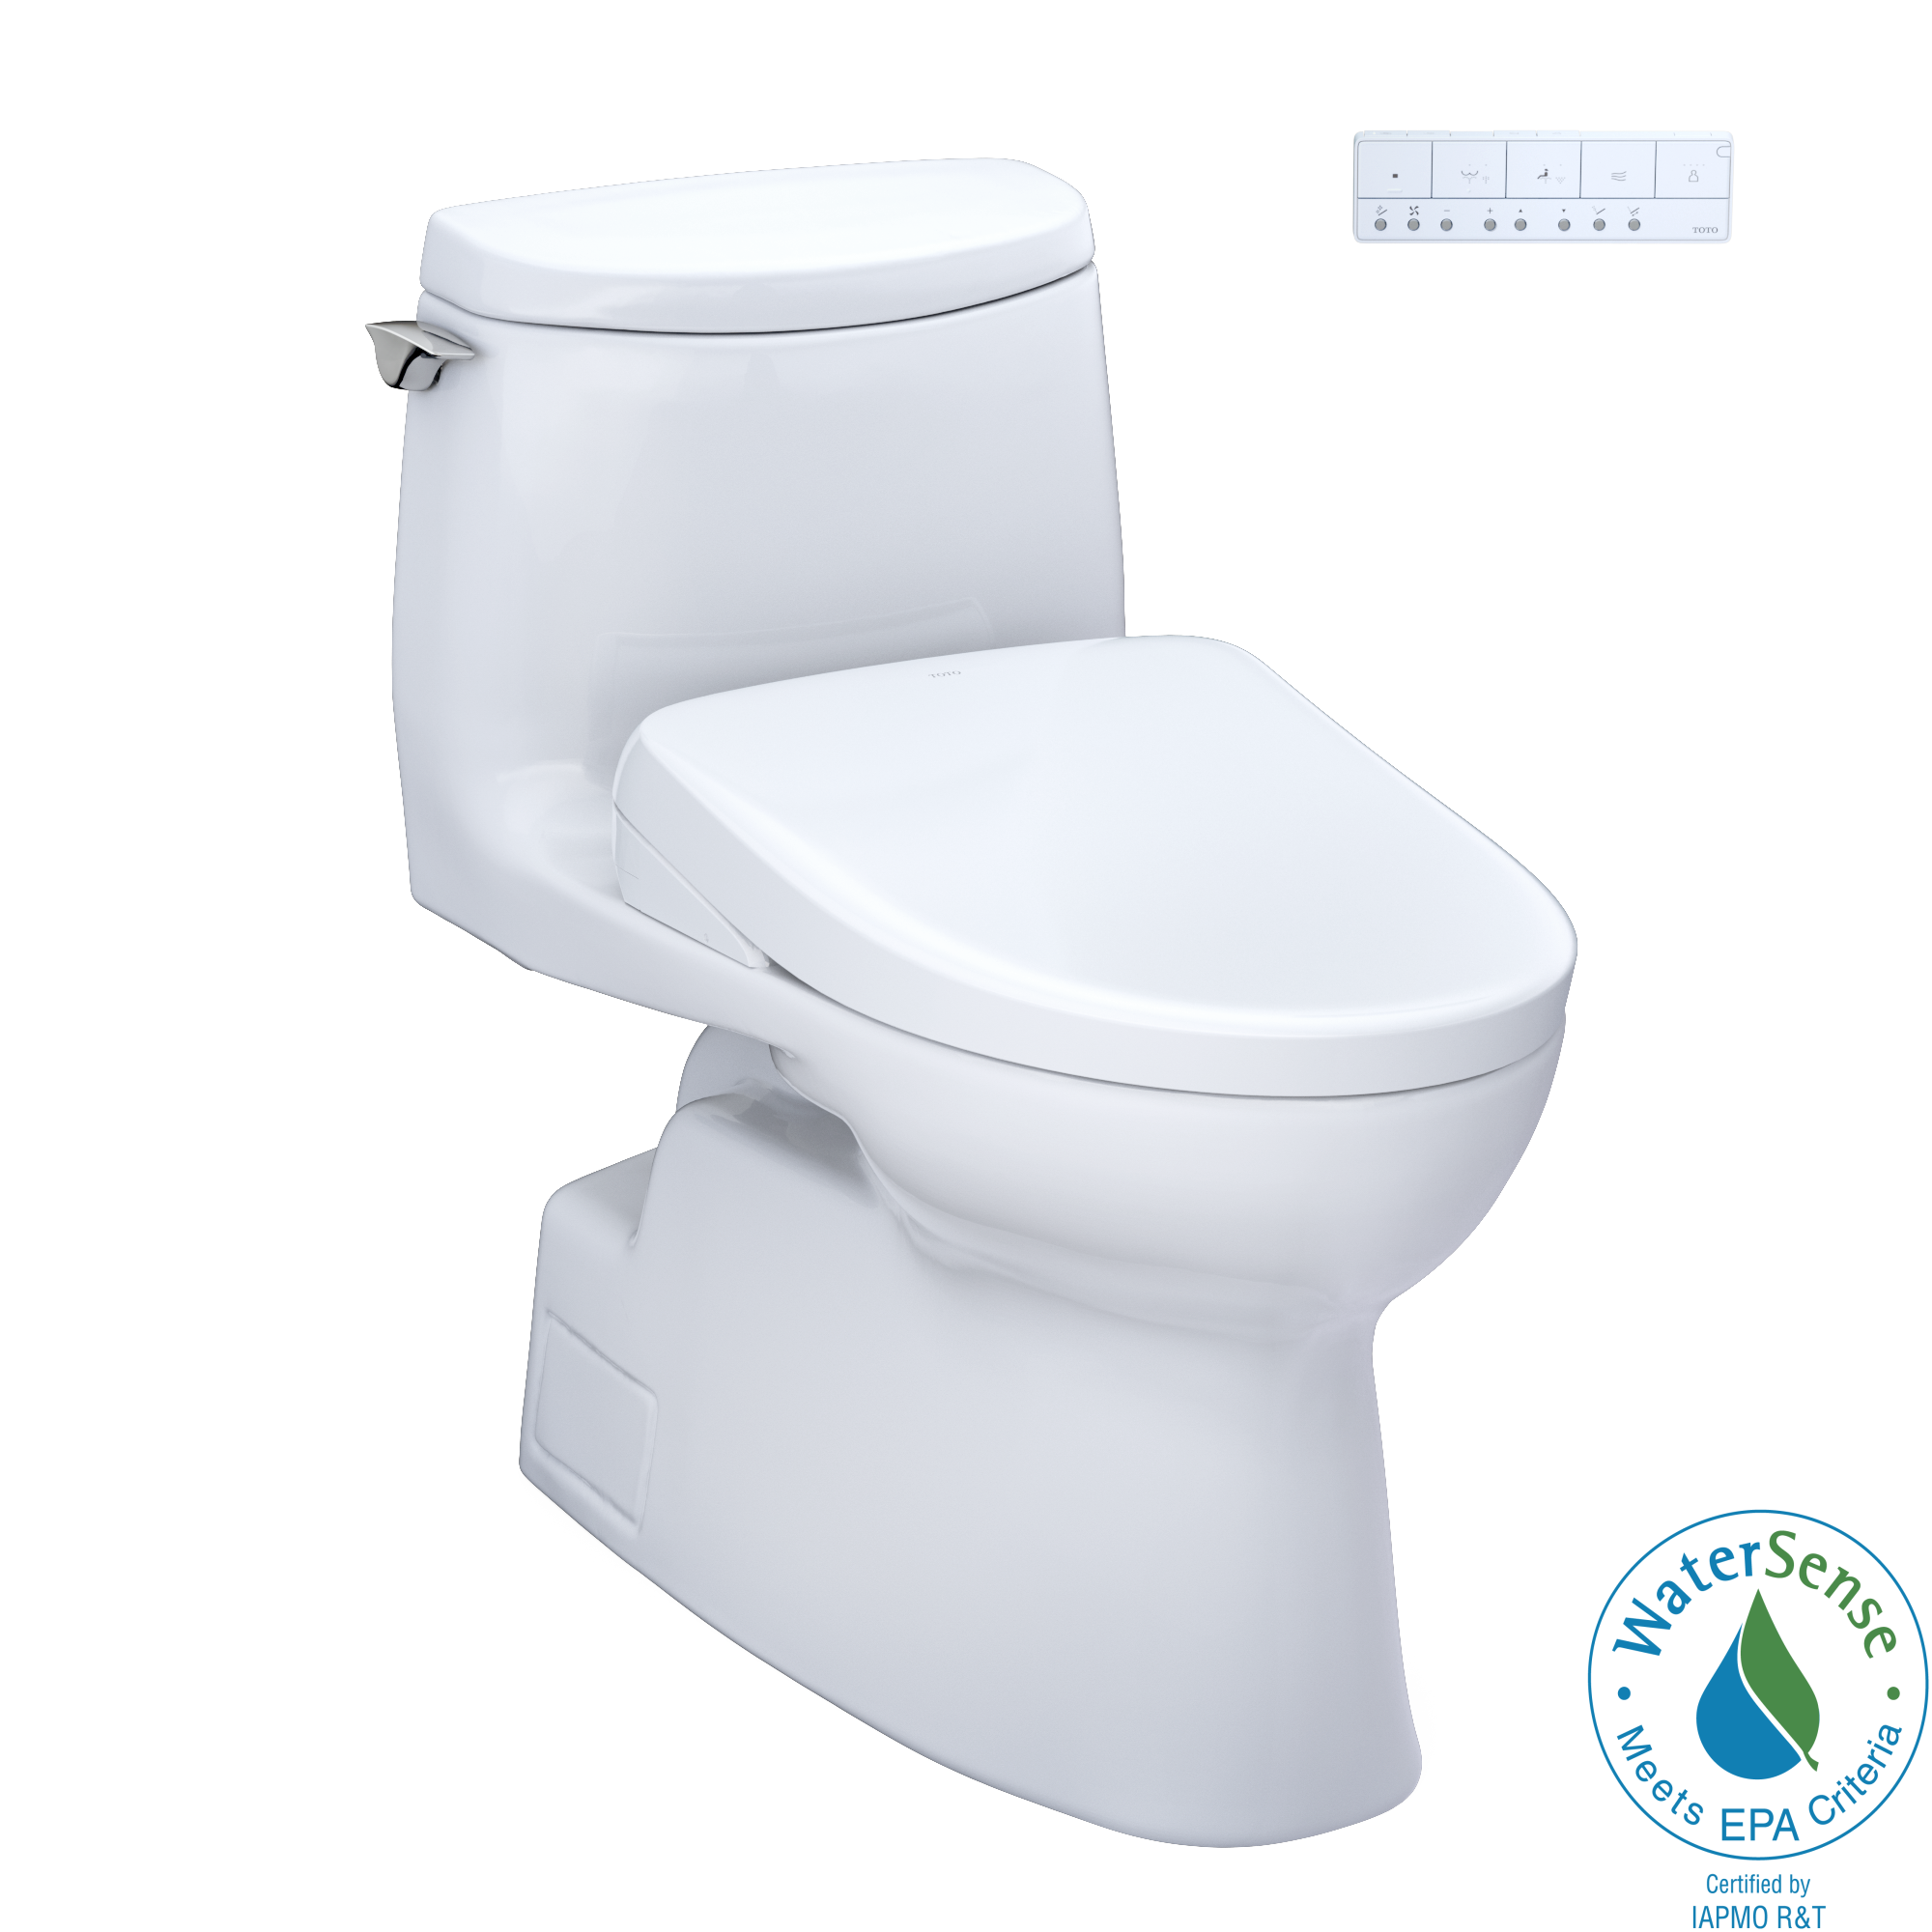 TOTO WASHLET+ Carlyle II 1G One-Piece Elongated 1.0 GPF Toilet and WASHLET+ S7A Contemporary Bidet Seat, Cotton White - MW6144736CUFG#01, MW6144736CUFGA#01